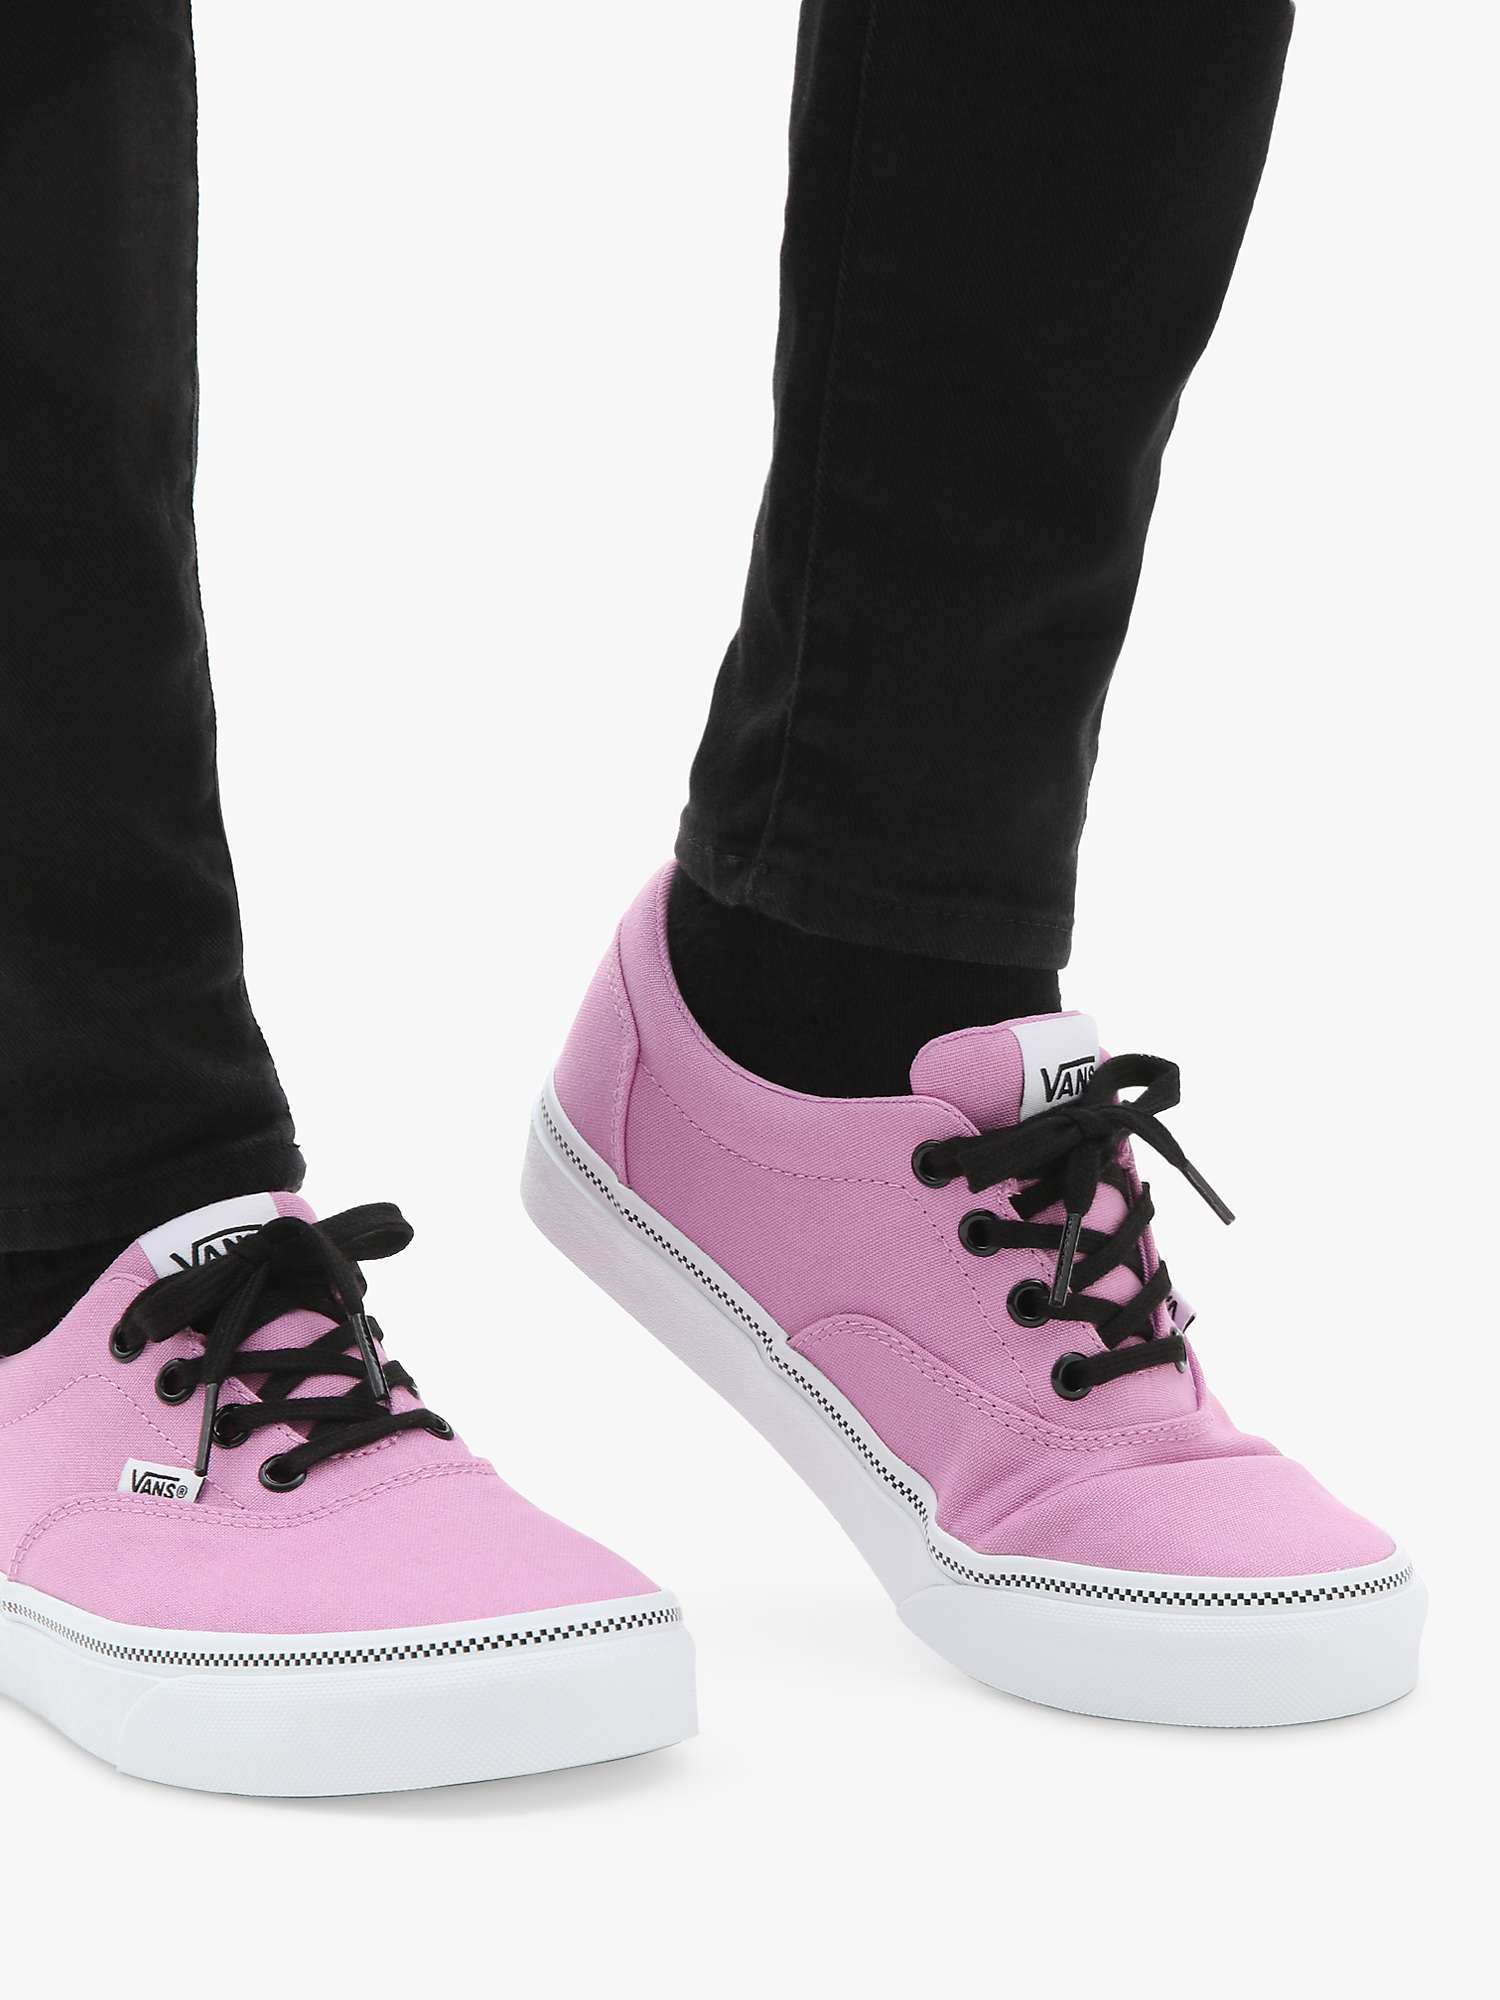 Vans Doheny Canvas Lace Up Trainers, Pink Orchid at John Lewis & Partners